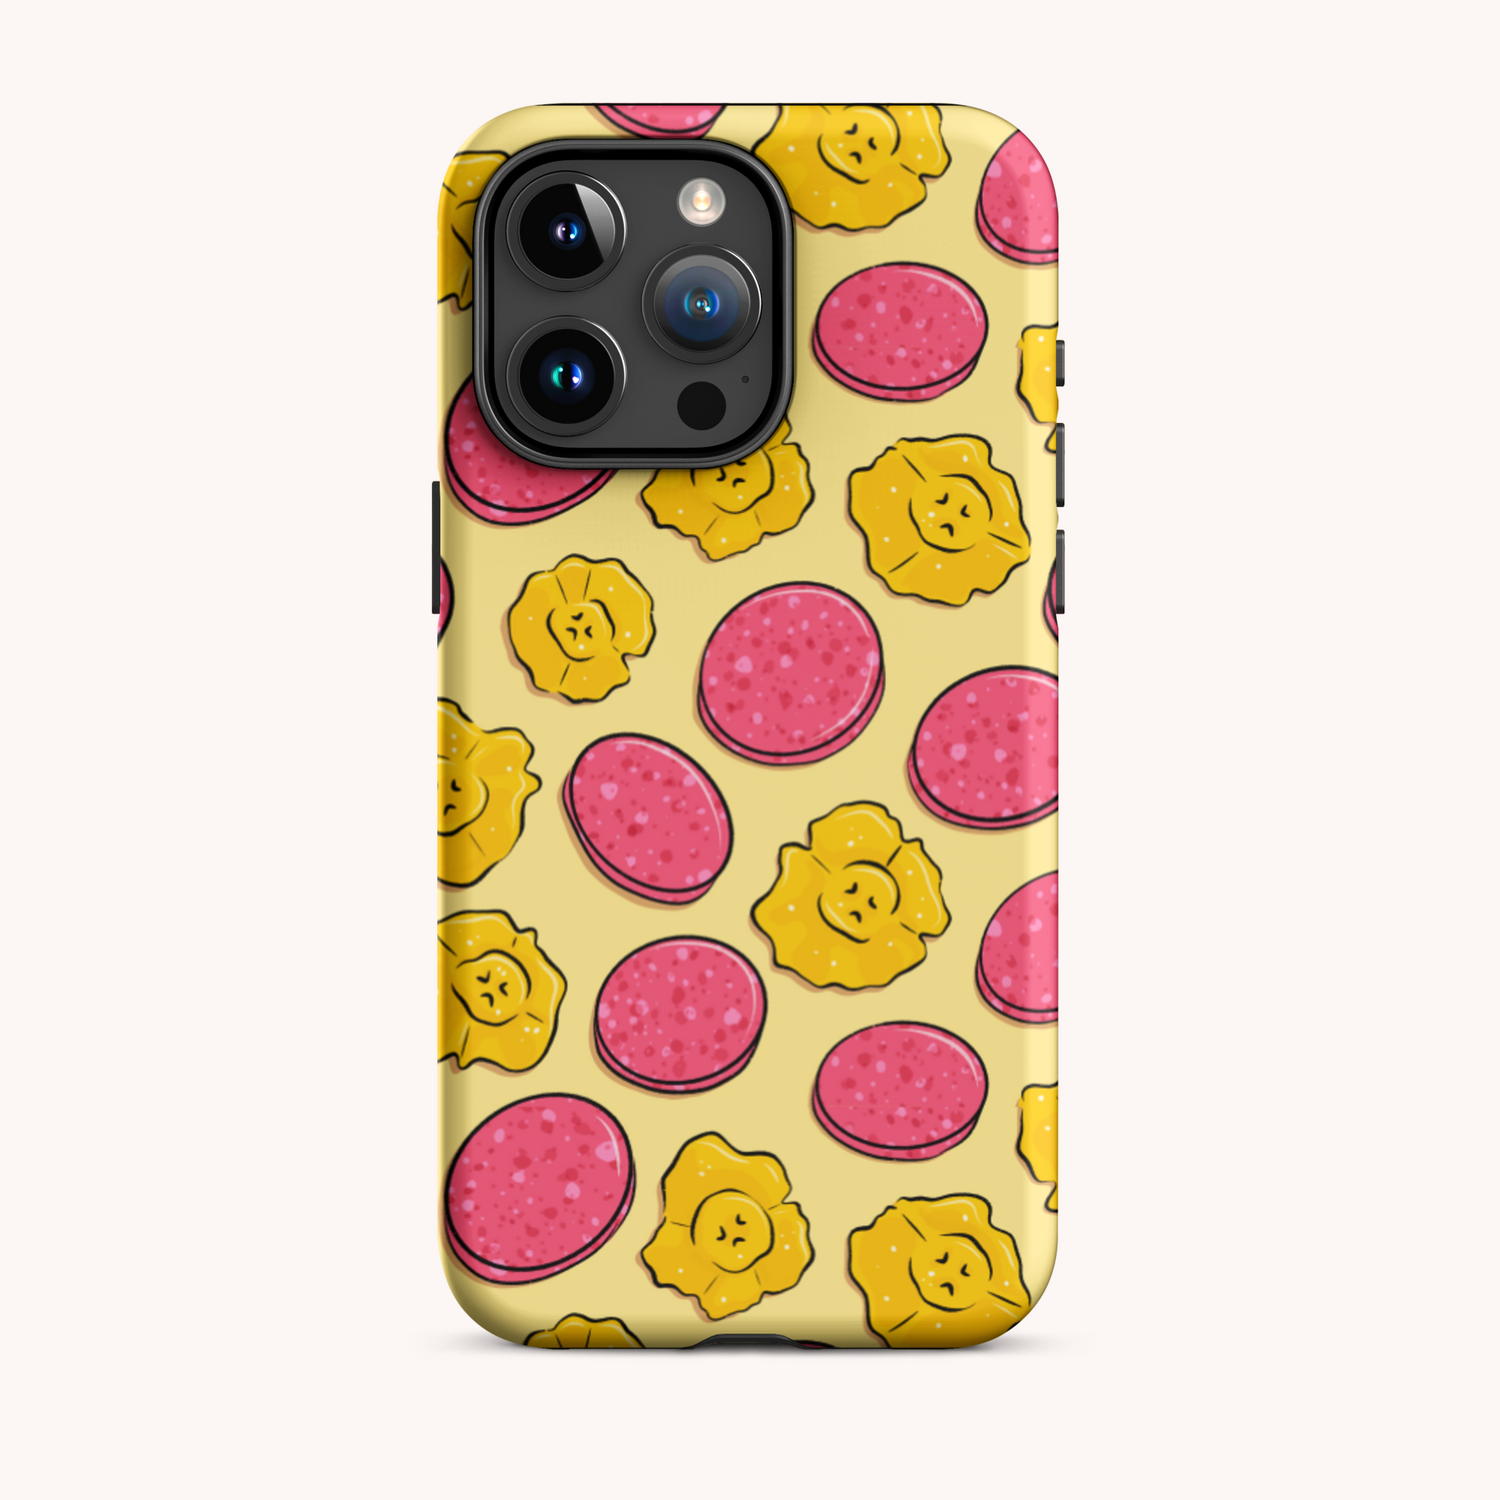 Tostones and salami phone case.